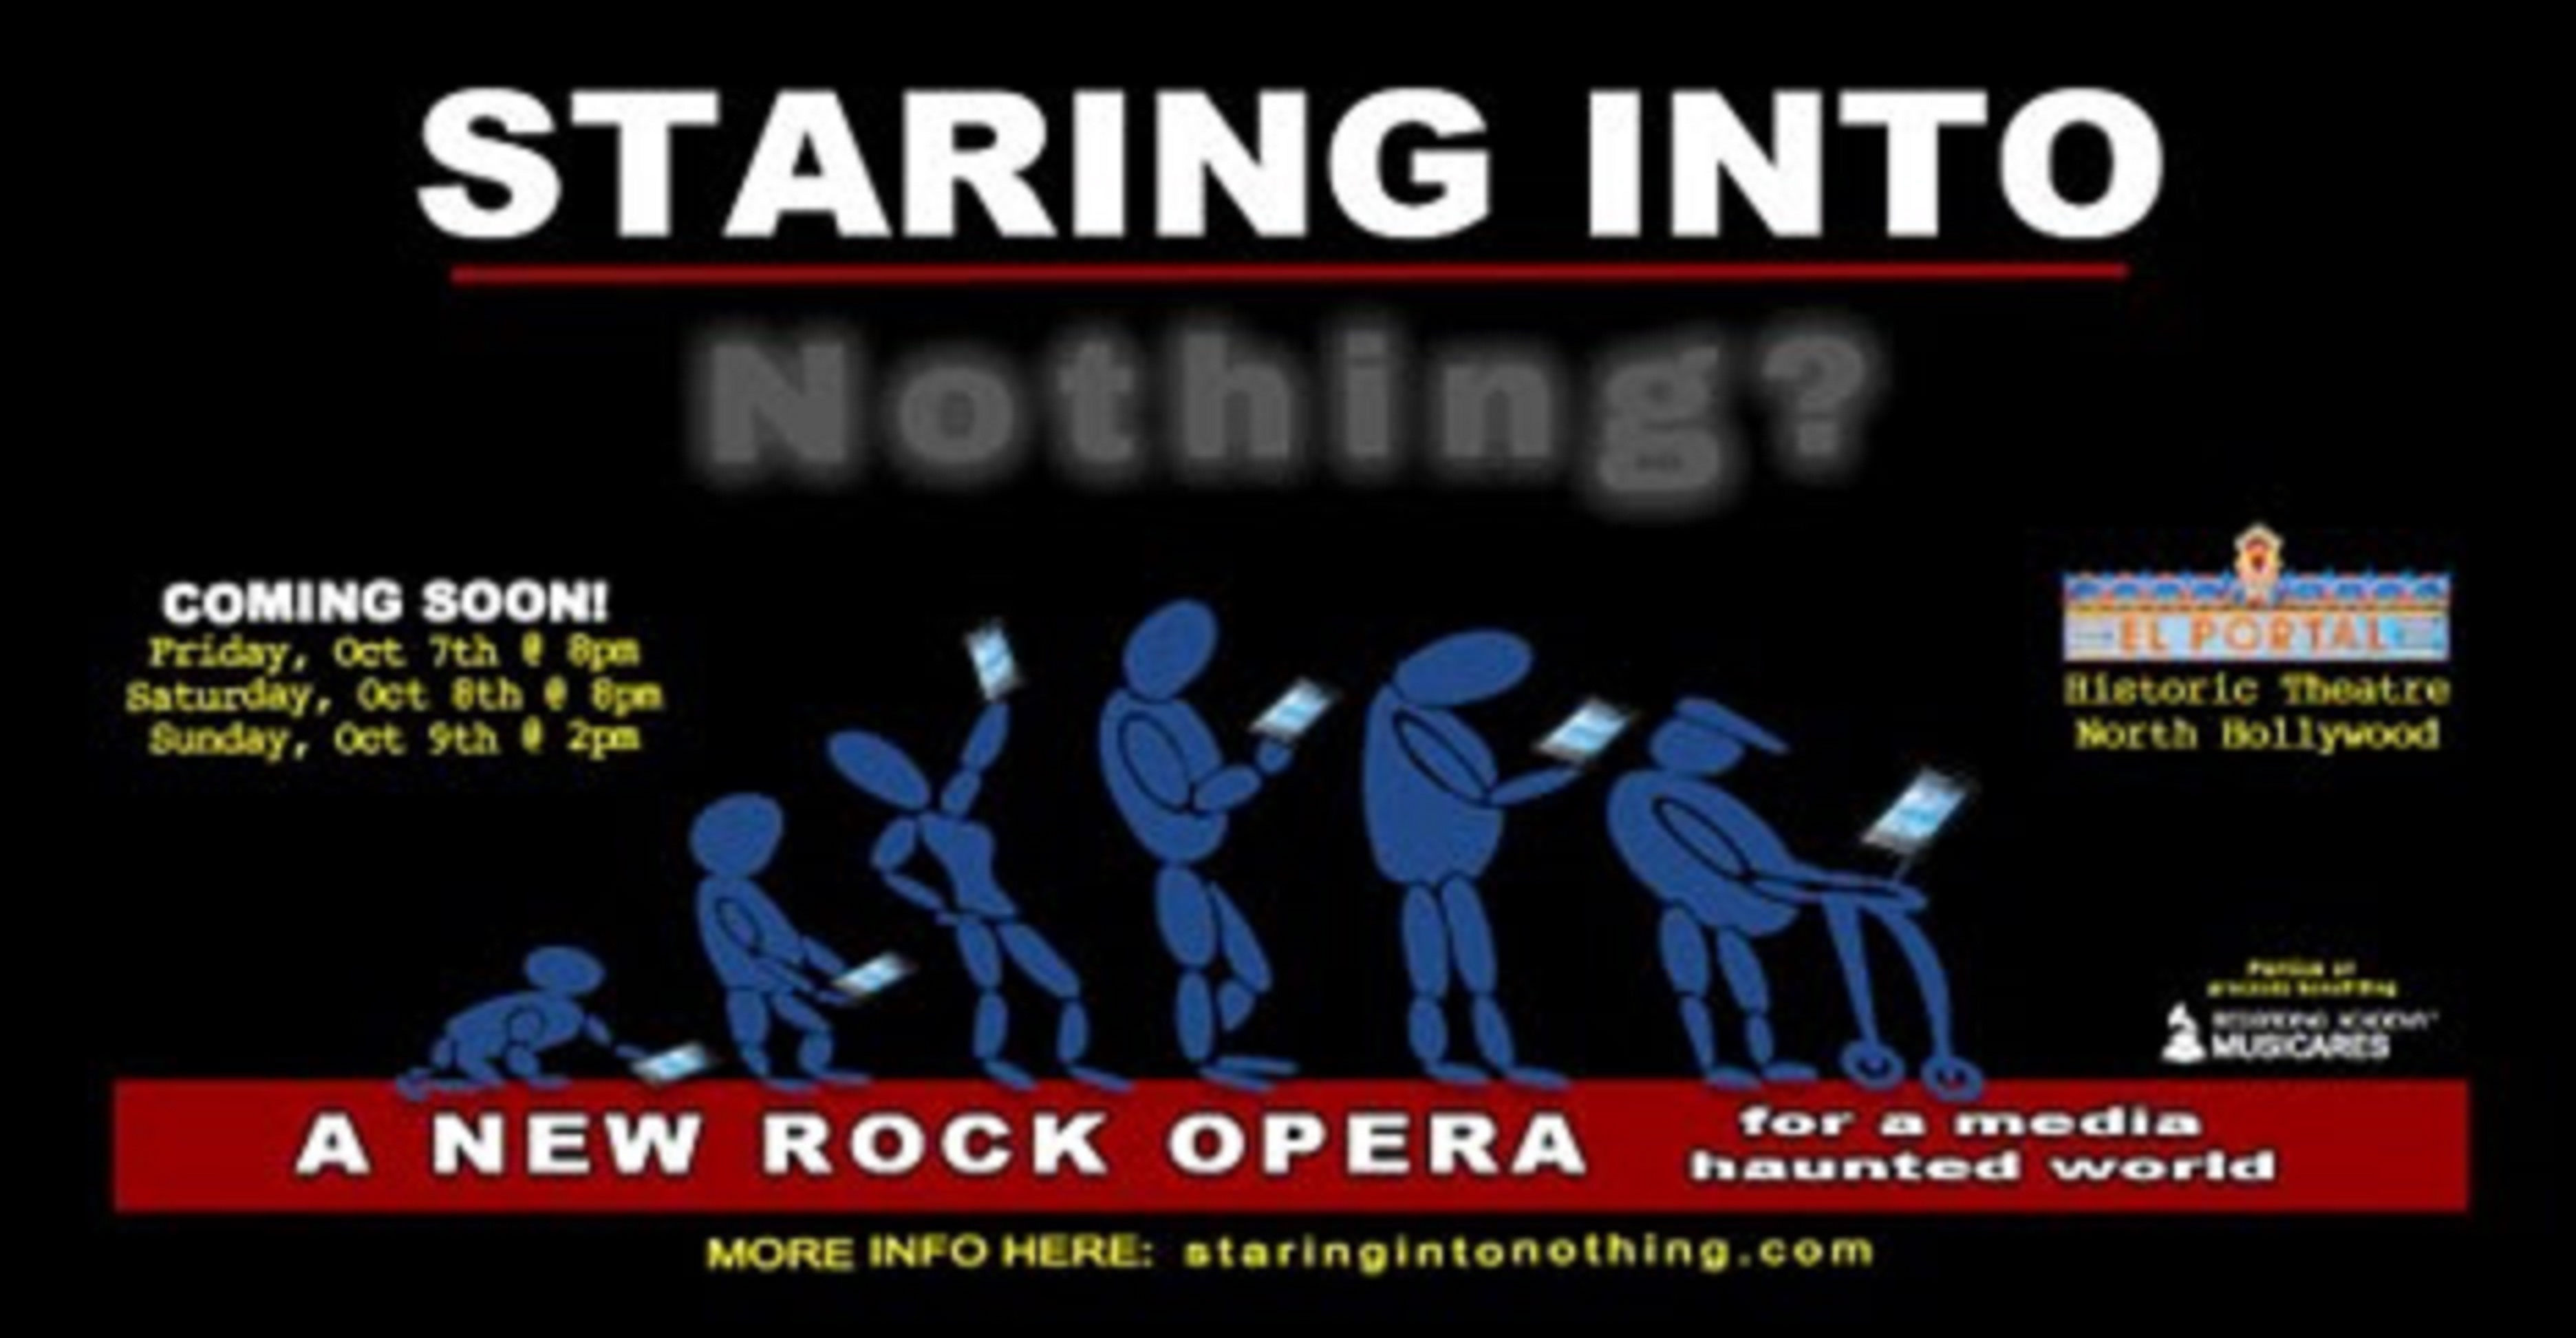 “STARING INTO NOTHING,” New Musical/Rock Opera Set To Debut Friday, October 7 At The El Portal Theatre In Los Angeles